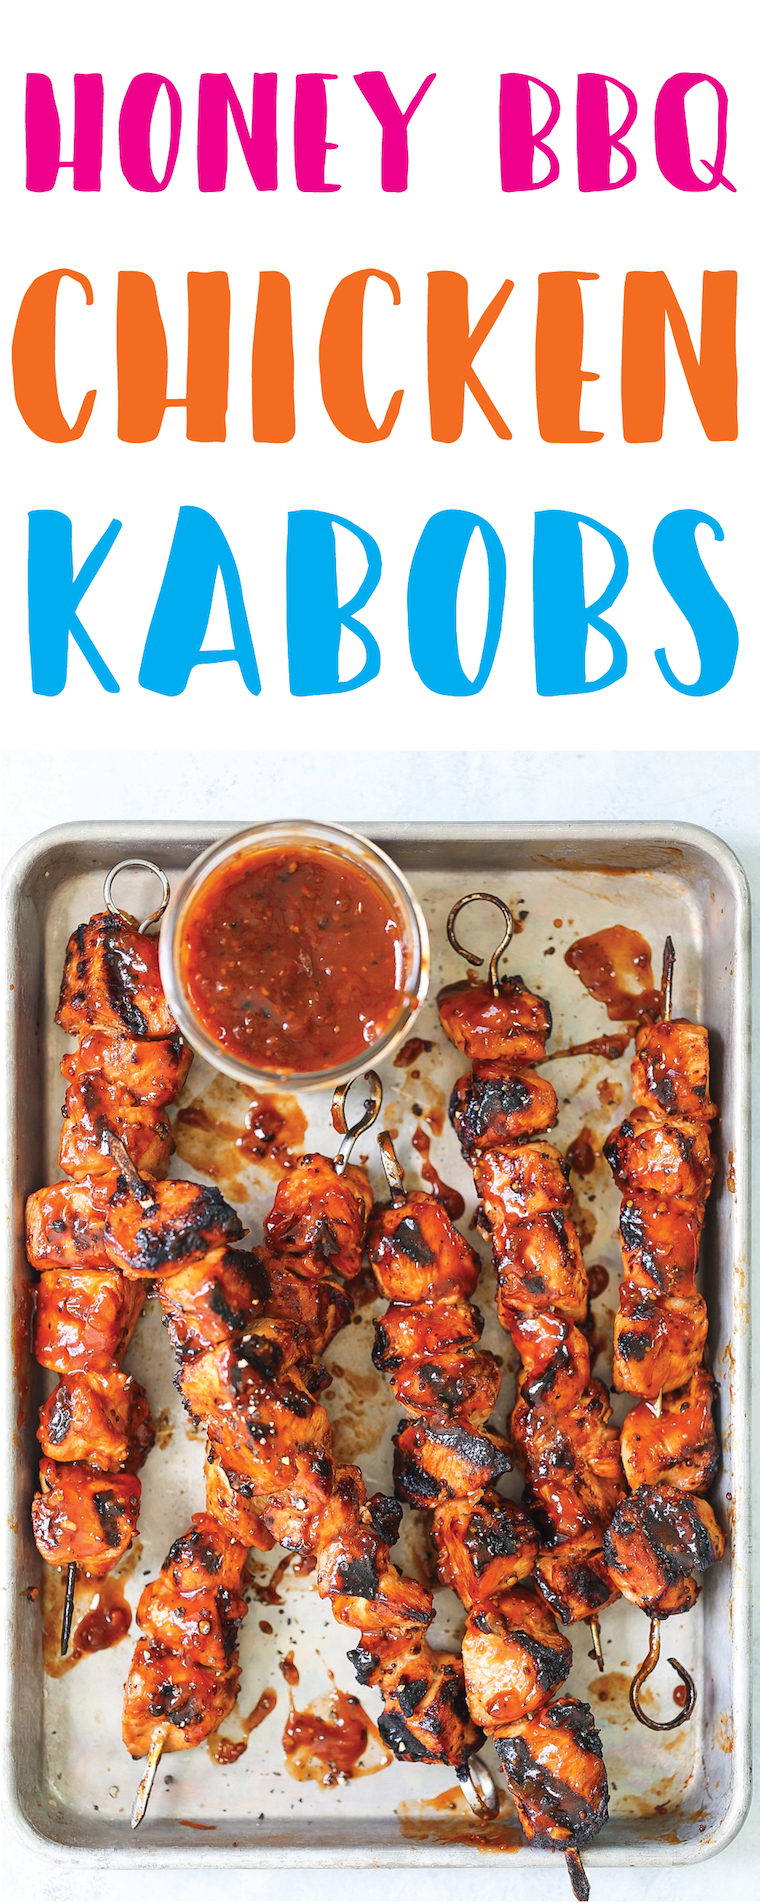 Honey BBQ Chicken Kabobs - Juicy, tender, super saucy BBQ chicken kabobs that everyone will love at your next barbecue! It’s the easiest BBQ sauce marinade that keeps the chicken so sweet and tangy, packed with tons of flavor!